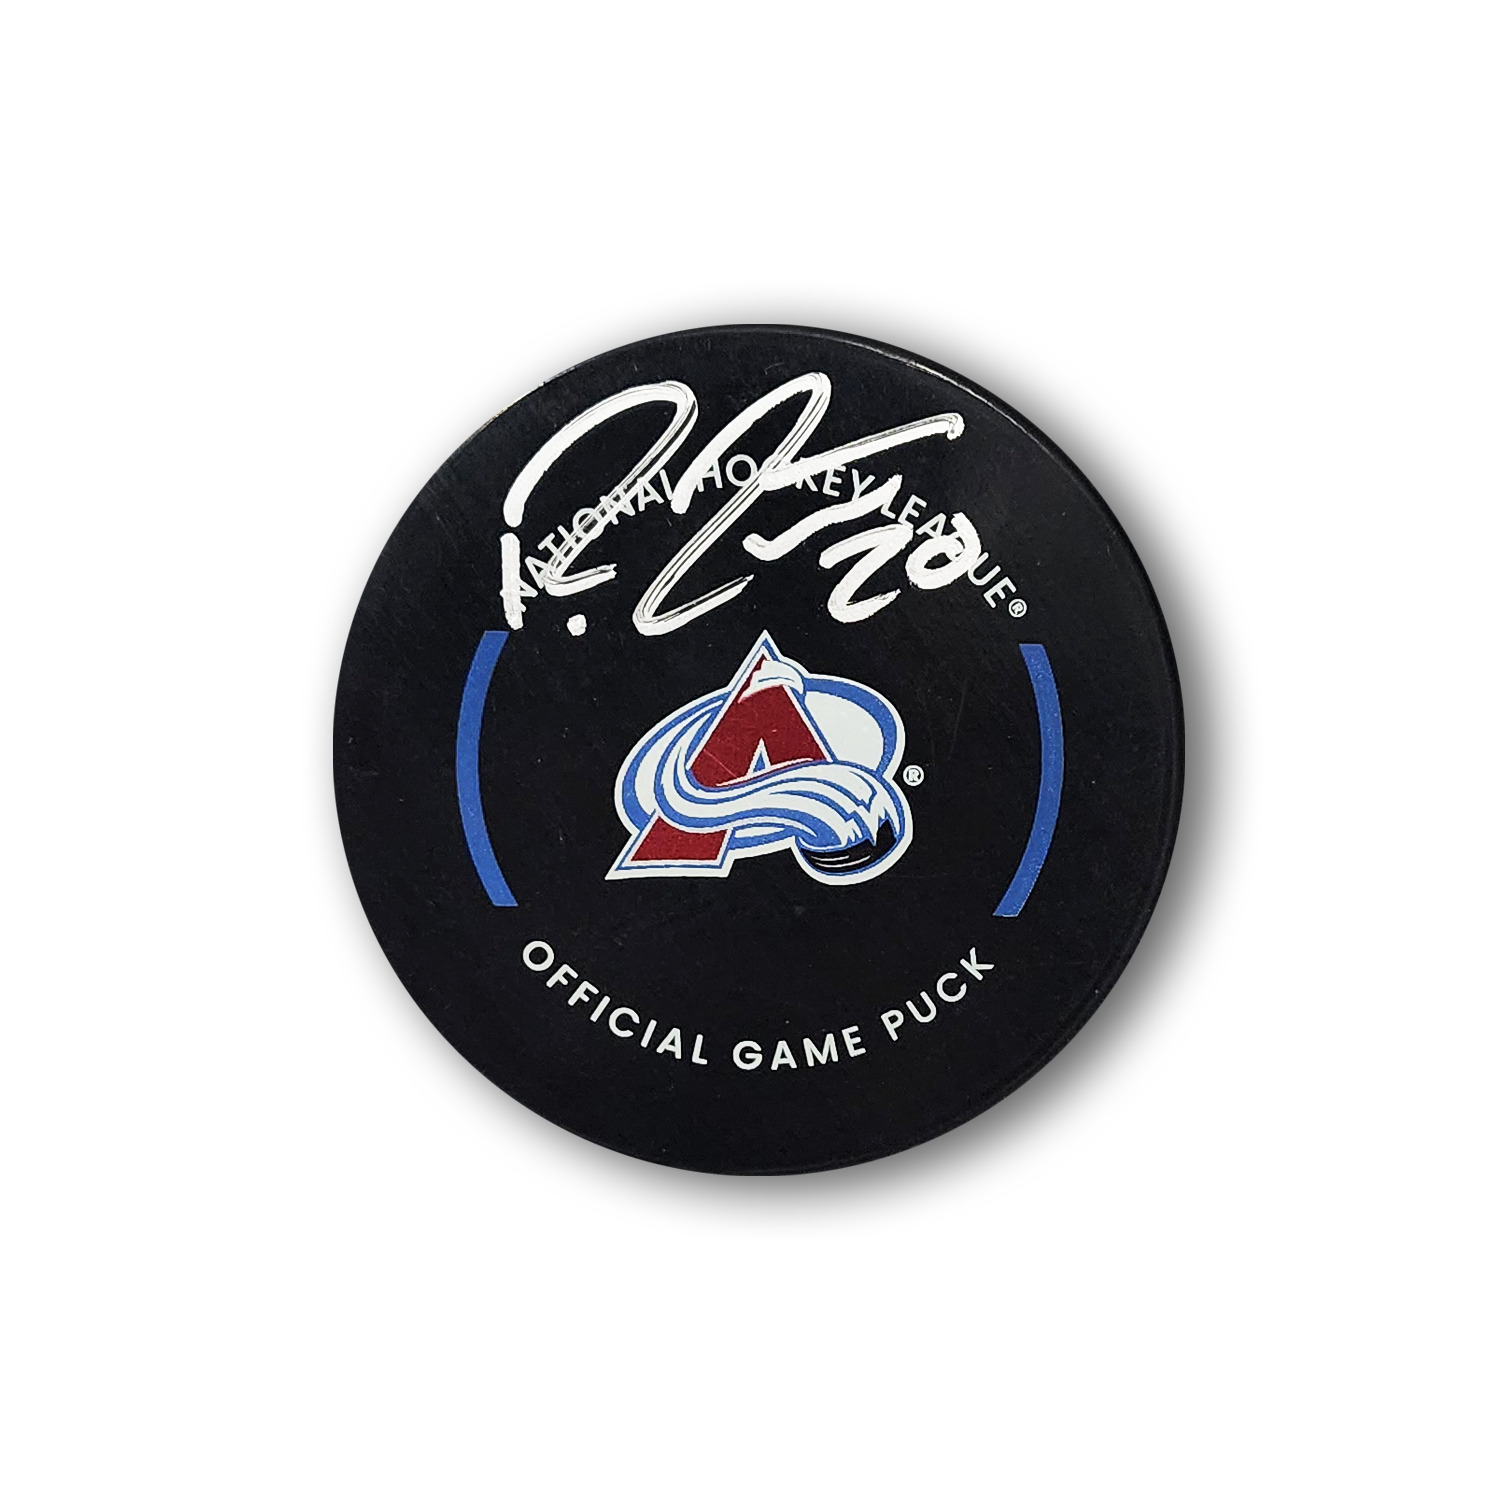 Ross Colton Autographed Colorado Avalanche Official Hockey Puck